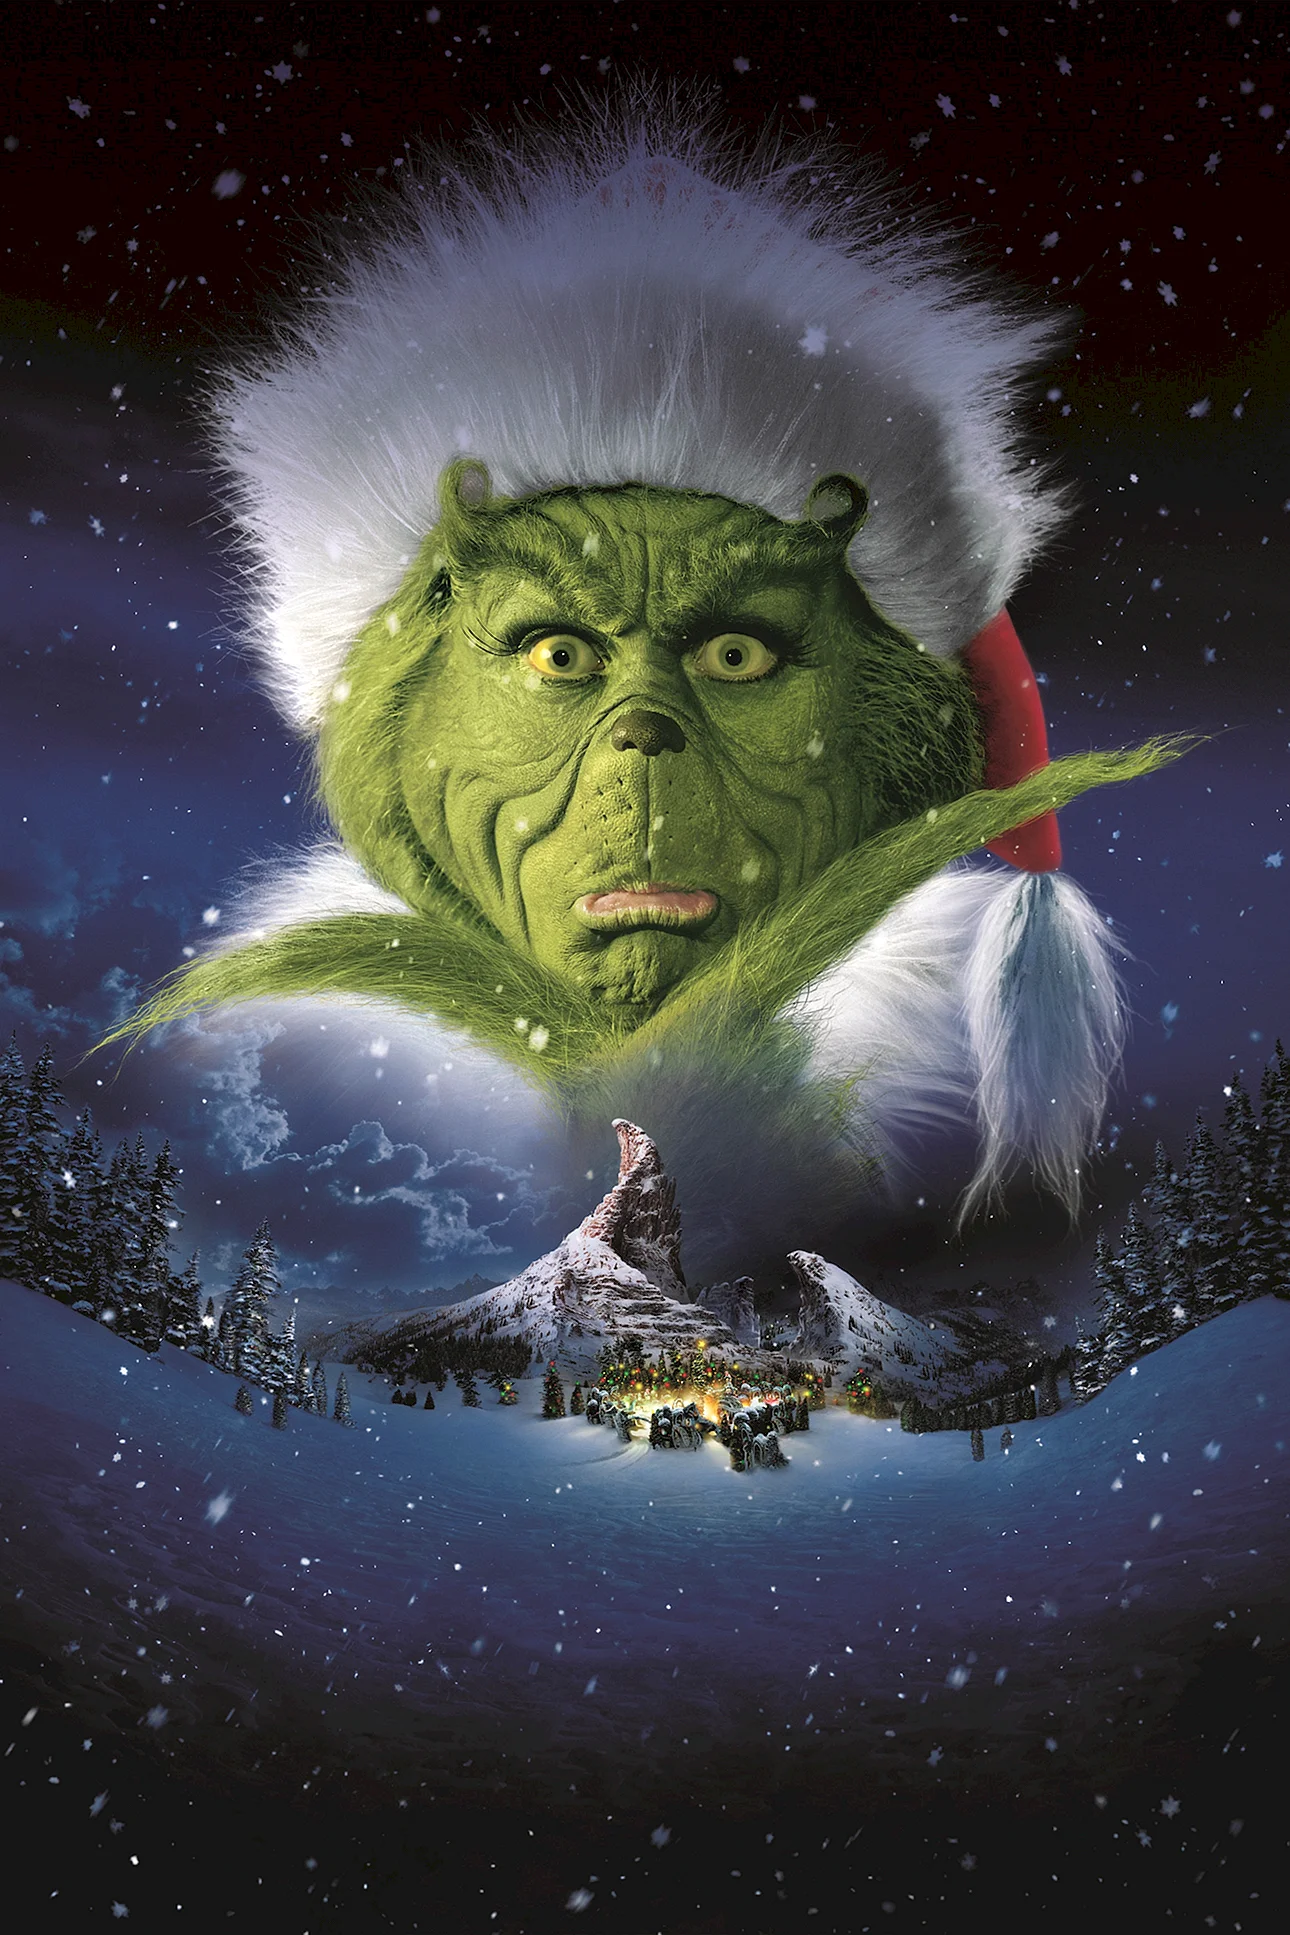 How The Grinch Stole Christmas 2000 Wallpaper For iPhone